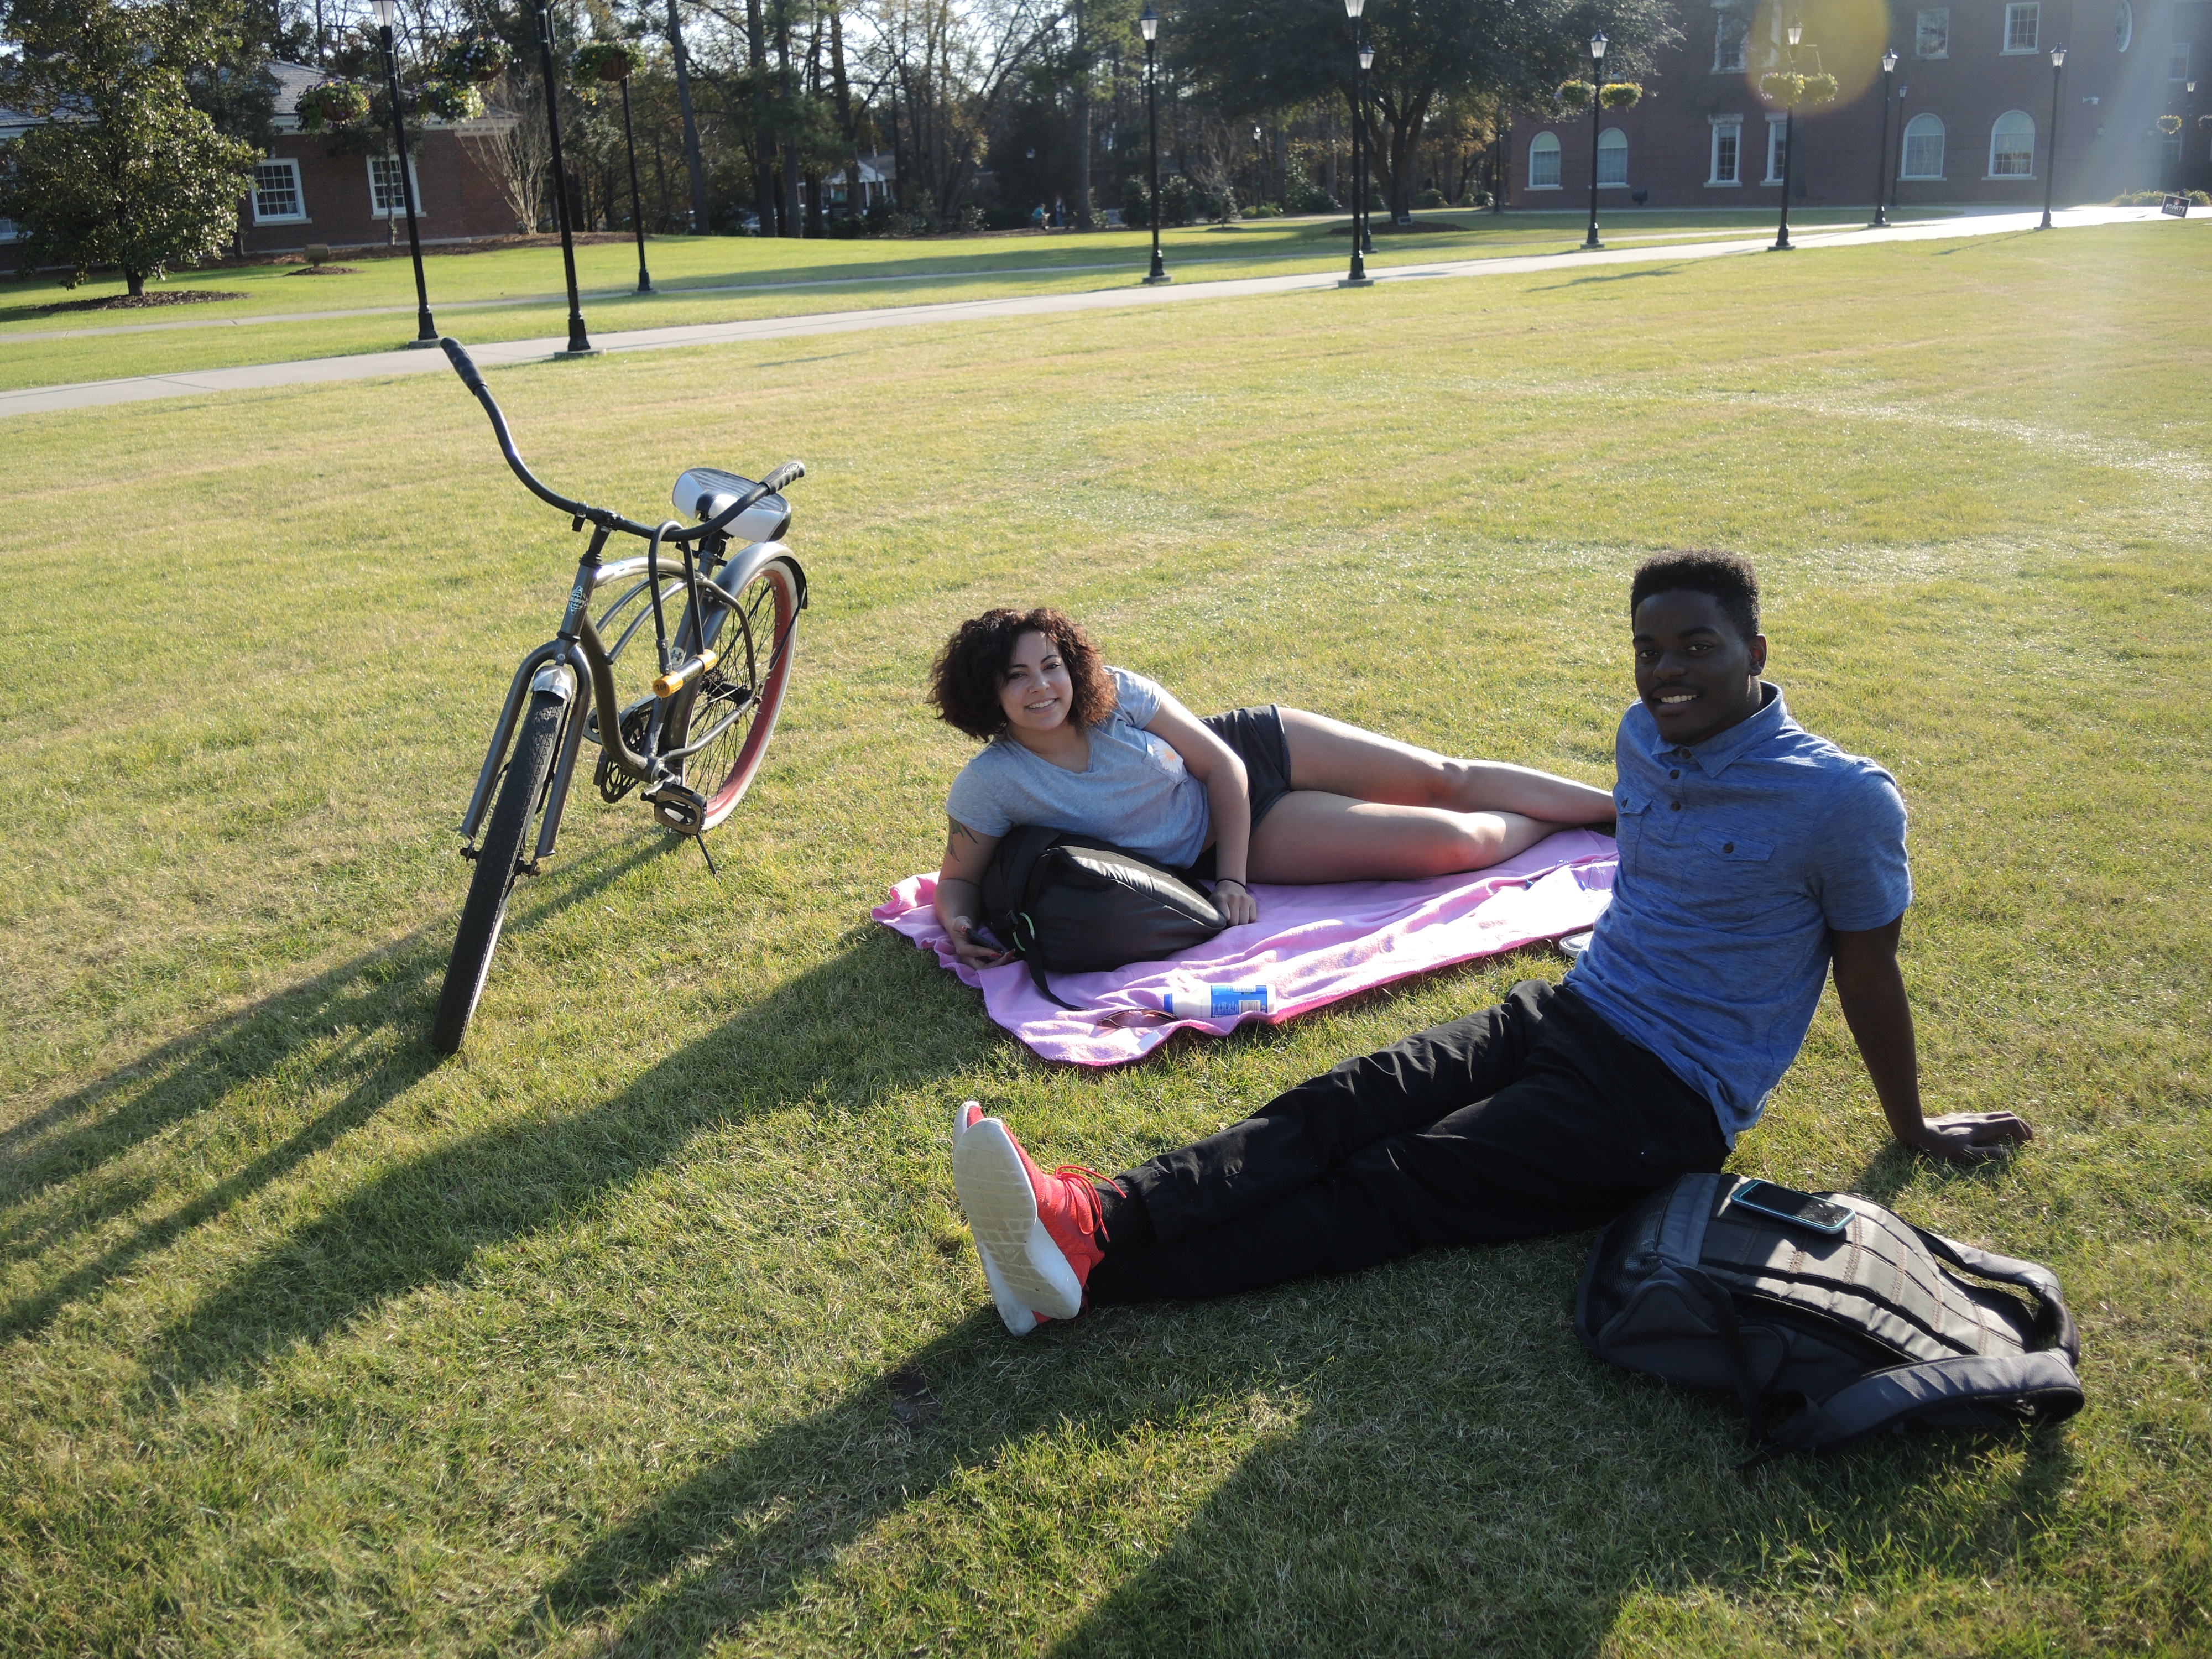 Nothing beats spending class breaks on Prince Lawn underneath the refreshing sun.